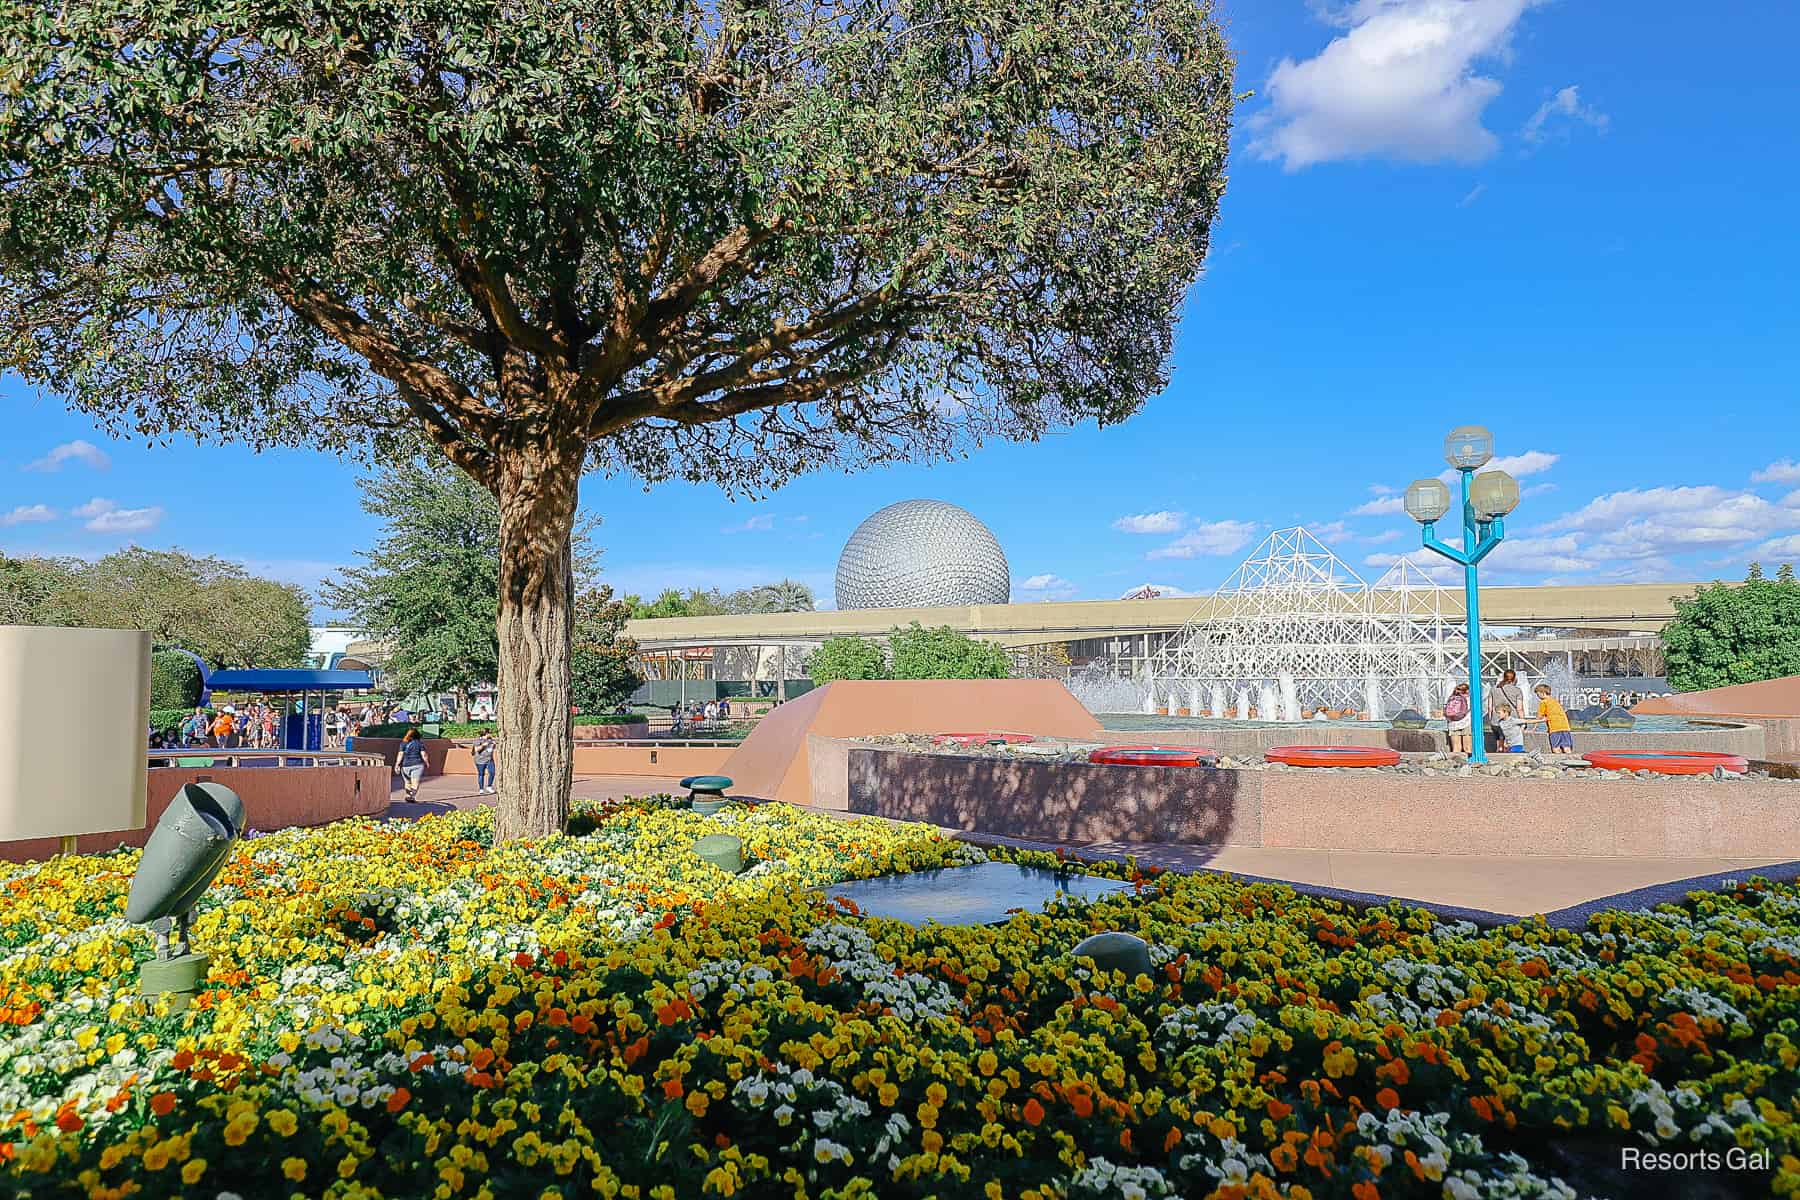 The gardens around the Imagination Pavilion at Epcot when the marigolds are in bloom. 